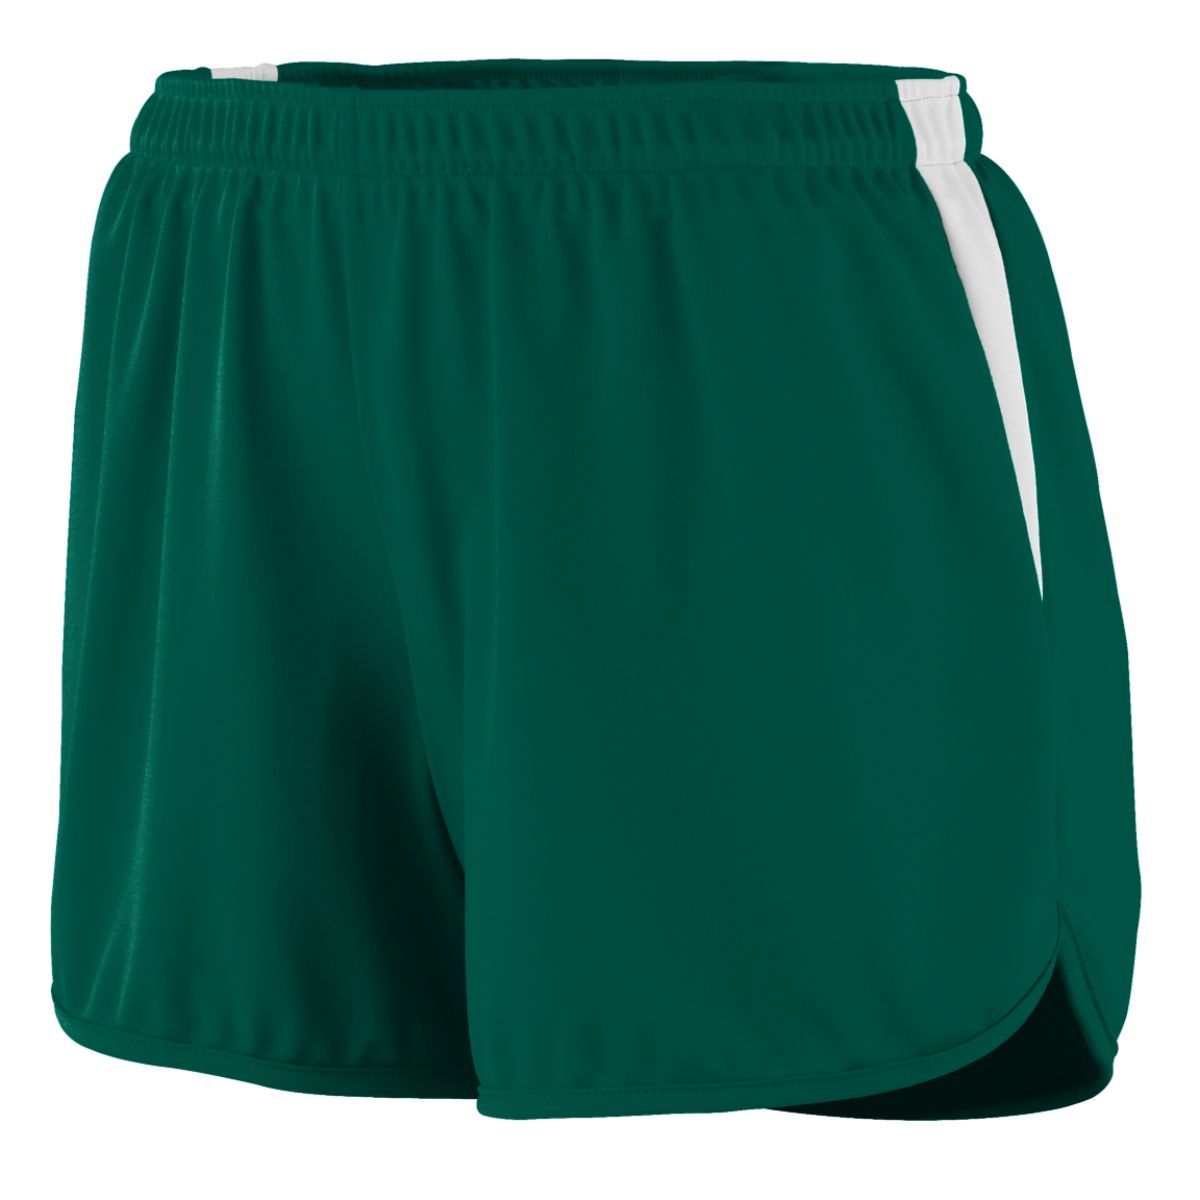 Augusta Sportswear Ladies Rapidpace Track Shorts in Dark Green/White  -Part of the Ladies, Ladies-Shorts, Augusta-Products, Track-Field product lines at KanaleyCreations.com